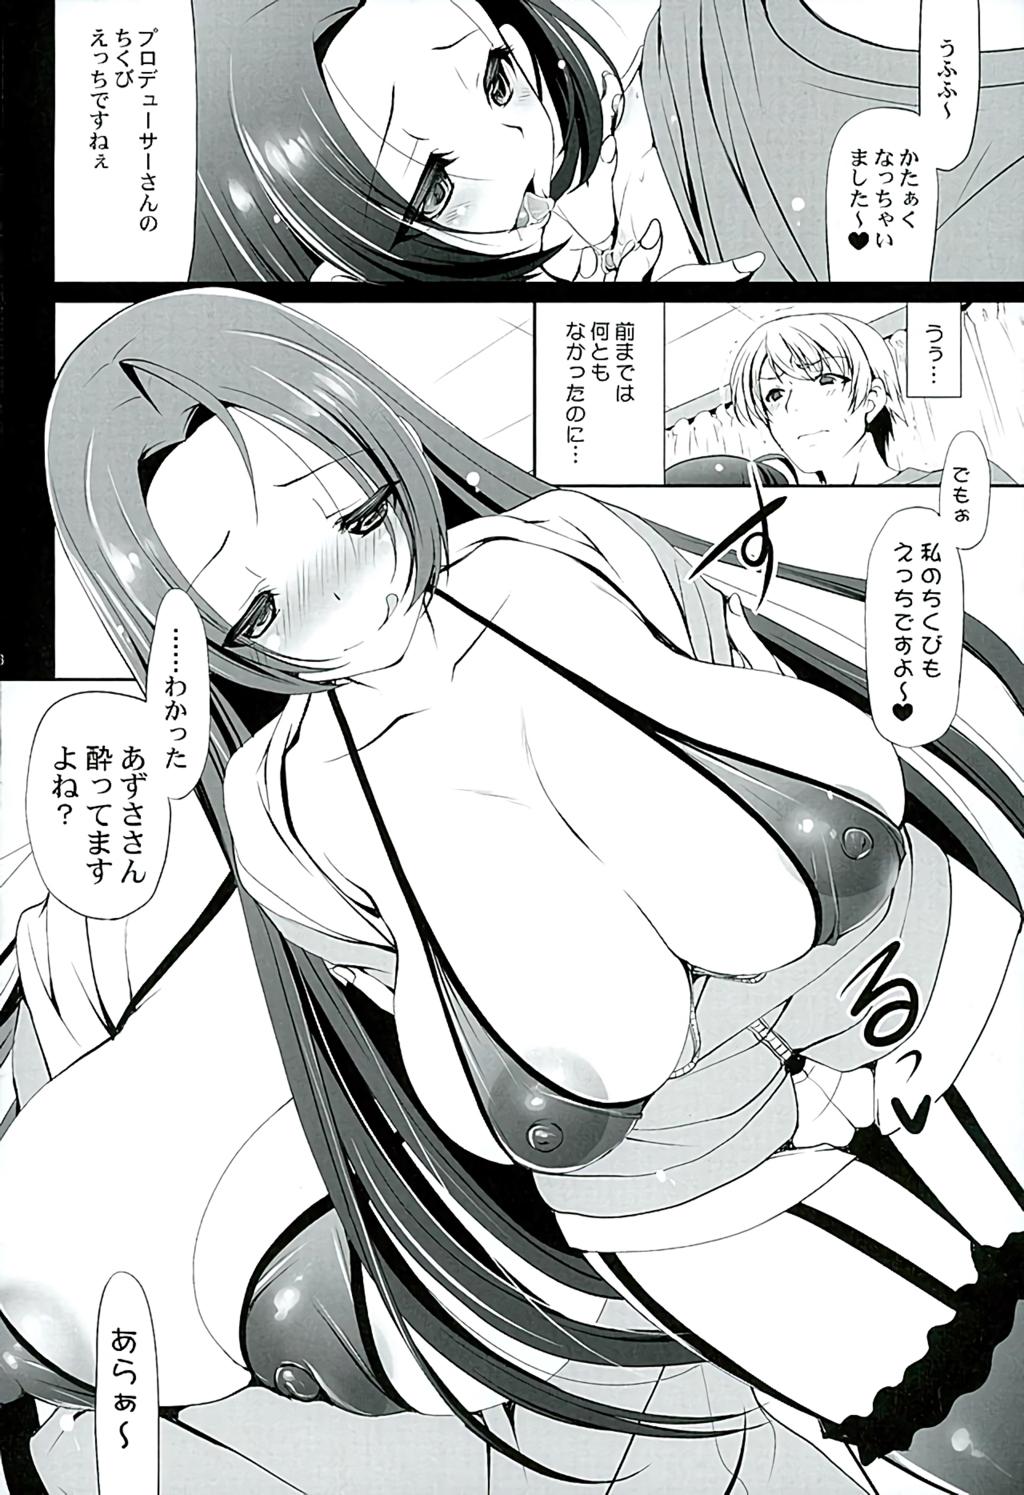 Fat Pussy Yome to Boku 7 - The idolmaster Cocksuckers - Page 5